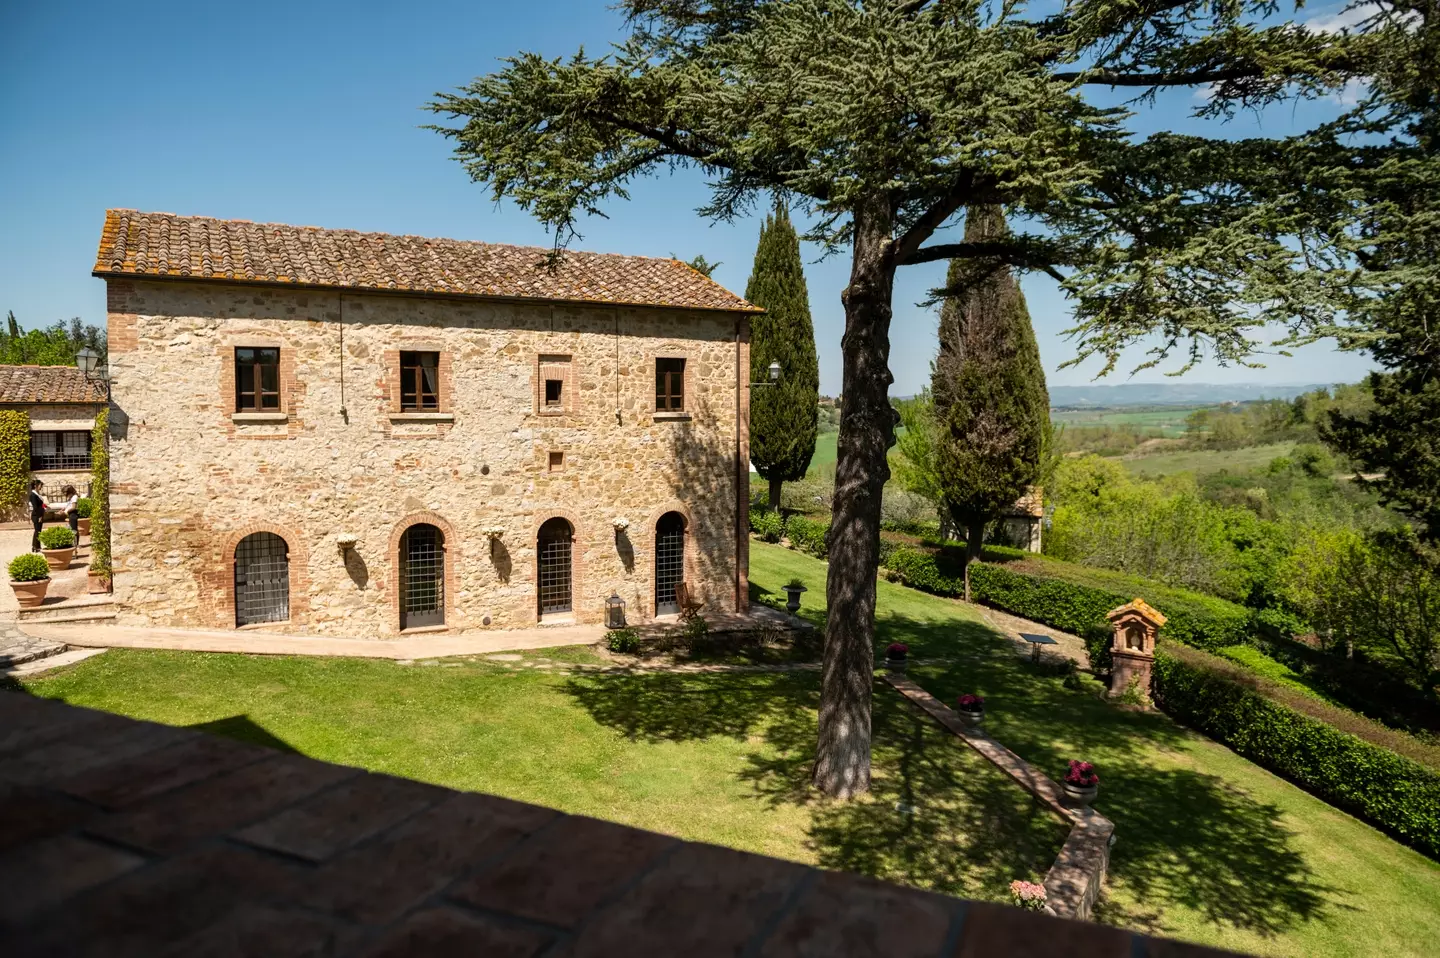 Villa Moretti is opening its doors this summer (